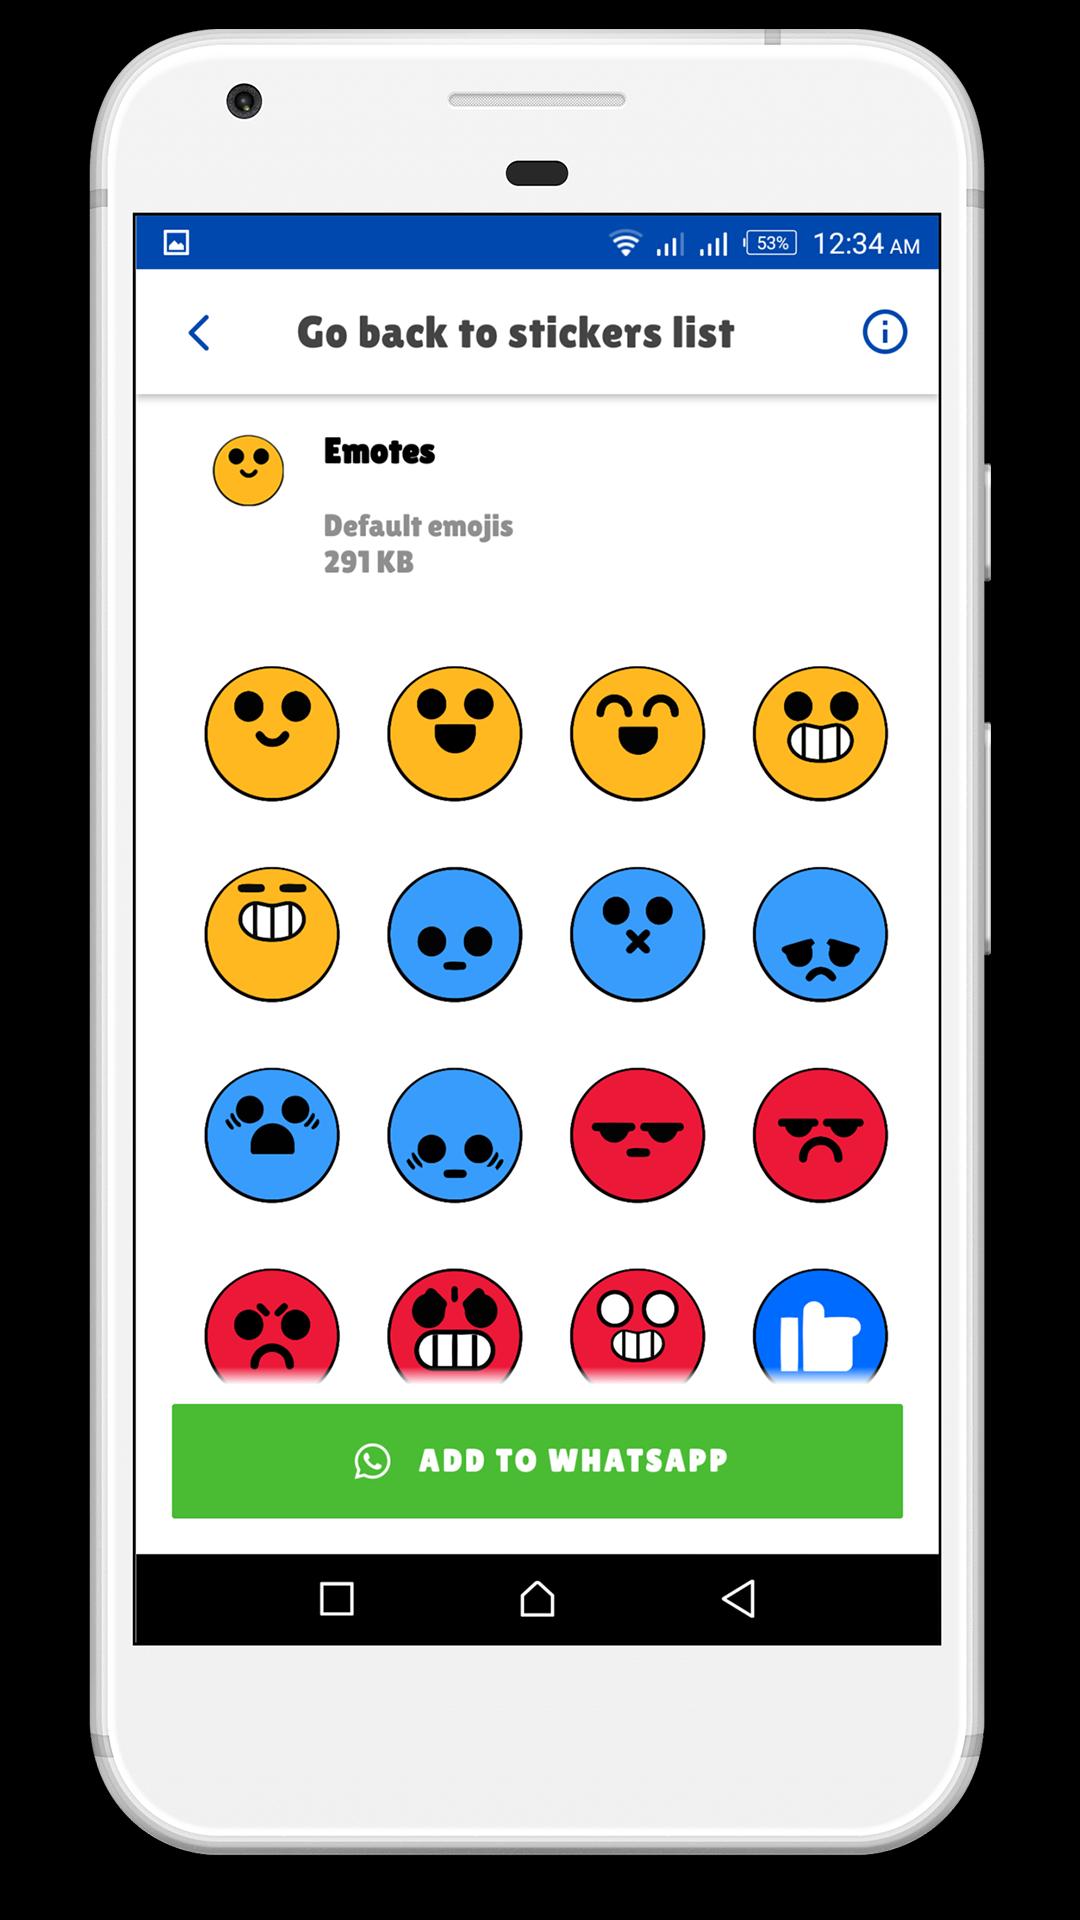 Stickers For Brawl Stars Wastickerapps For Android Apk Download - emotes emojis de brawl stars